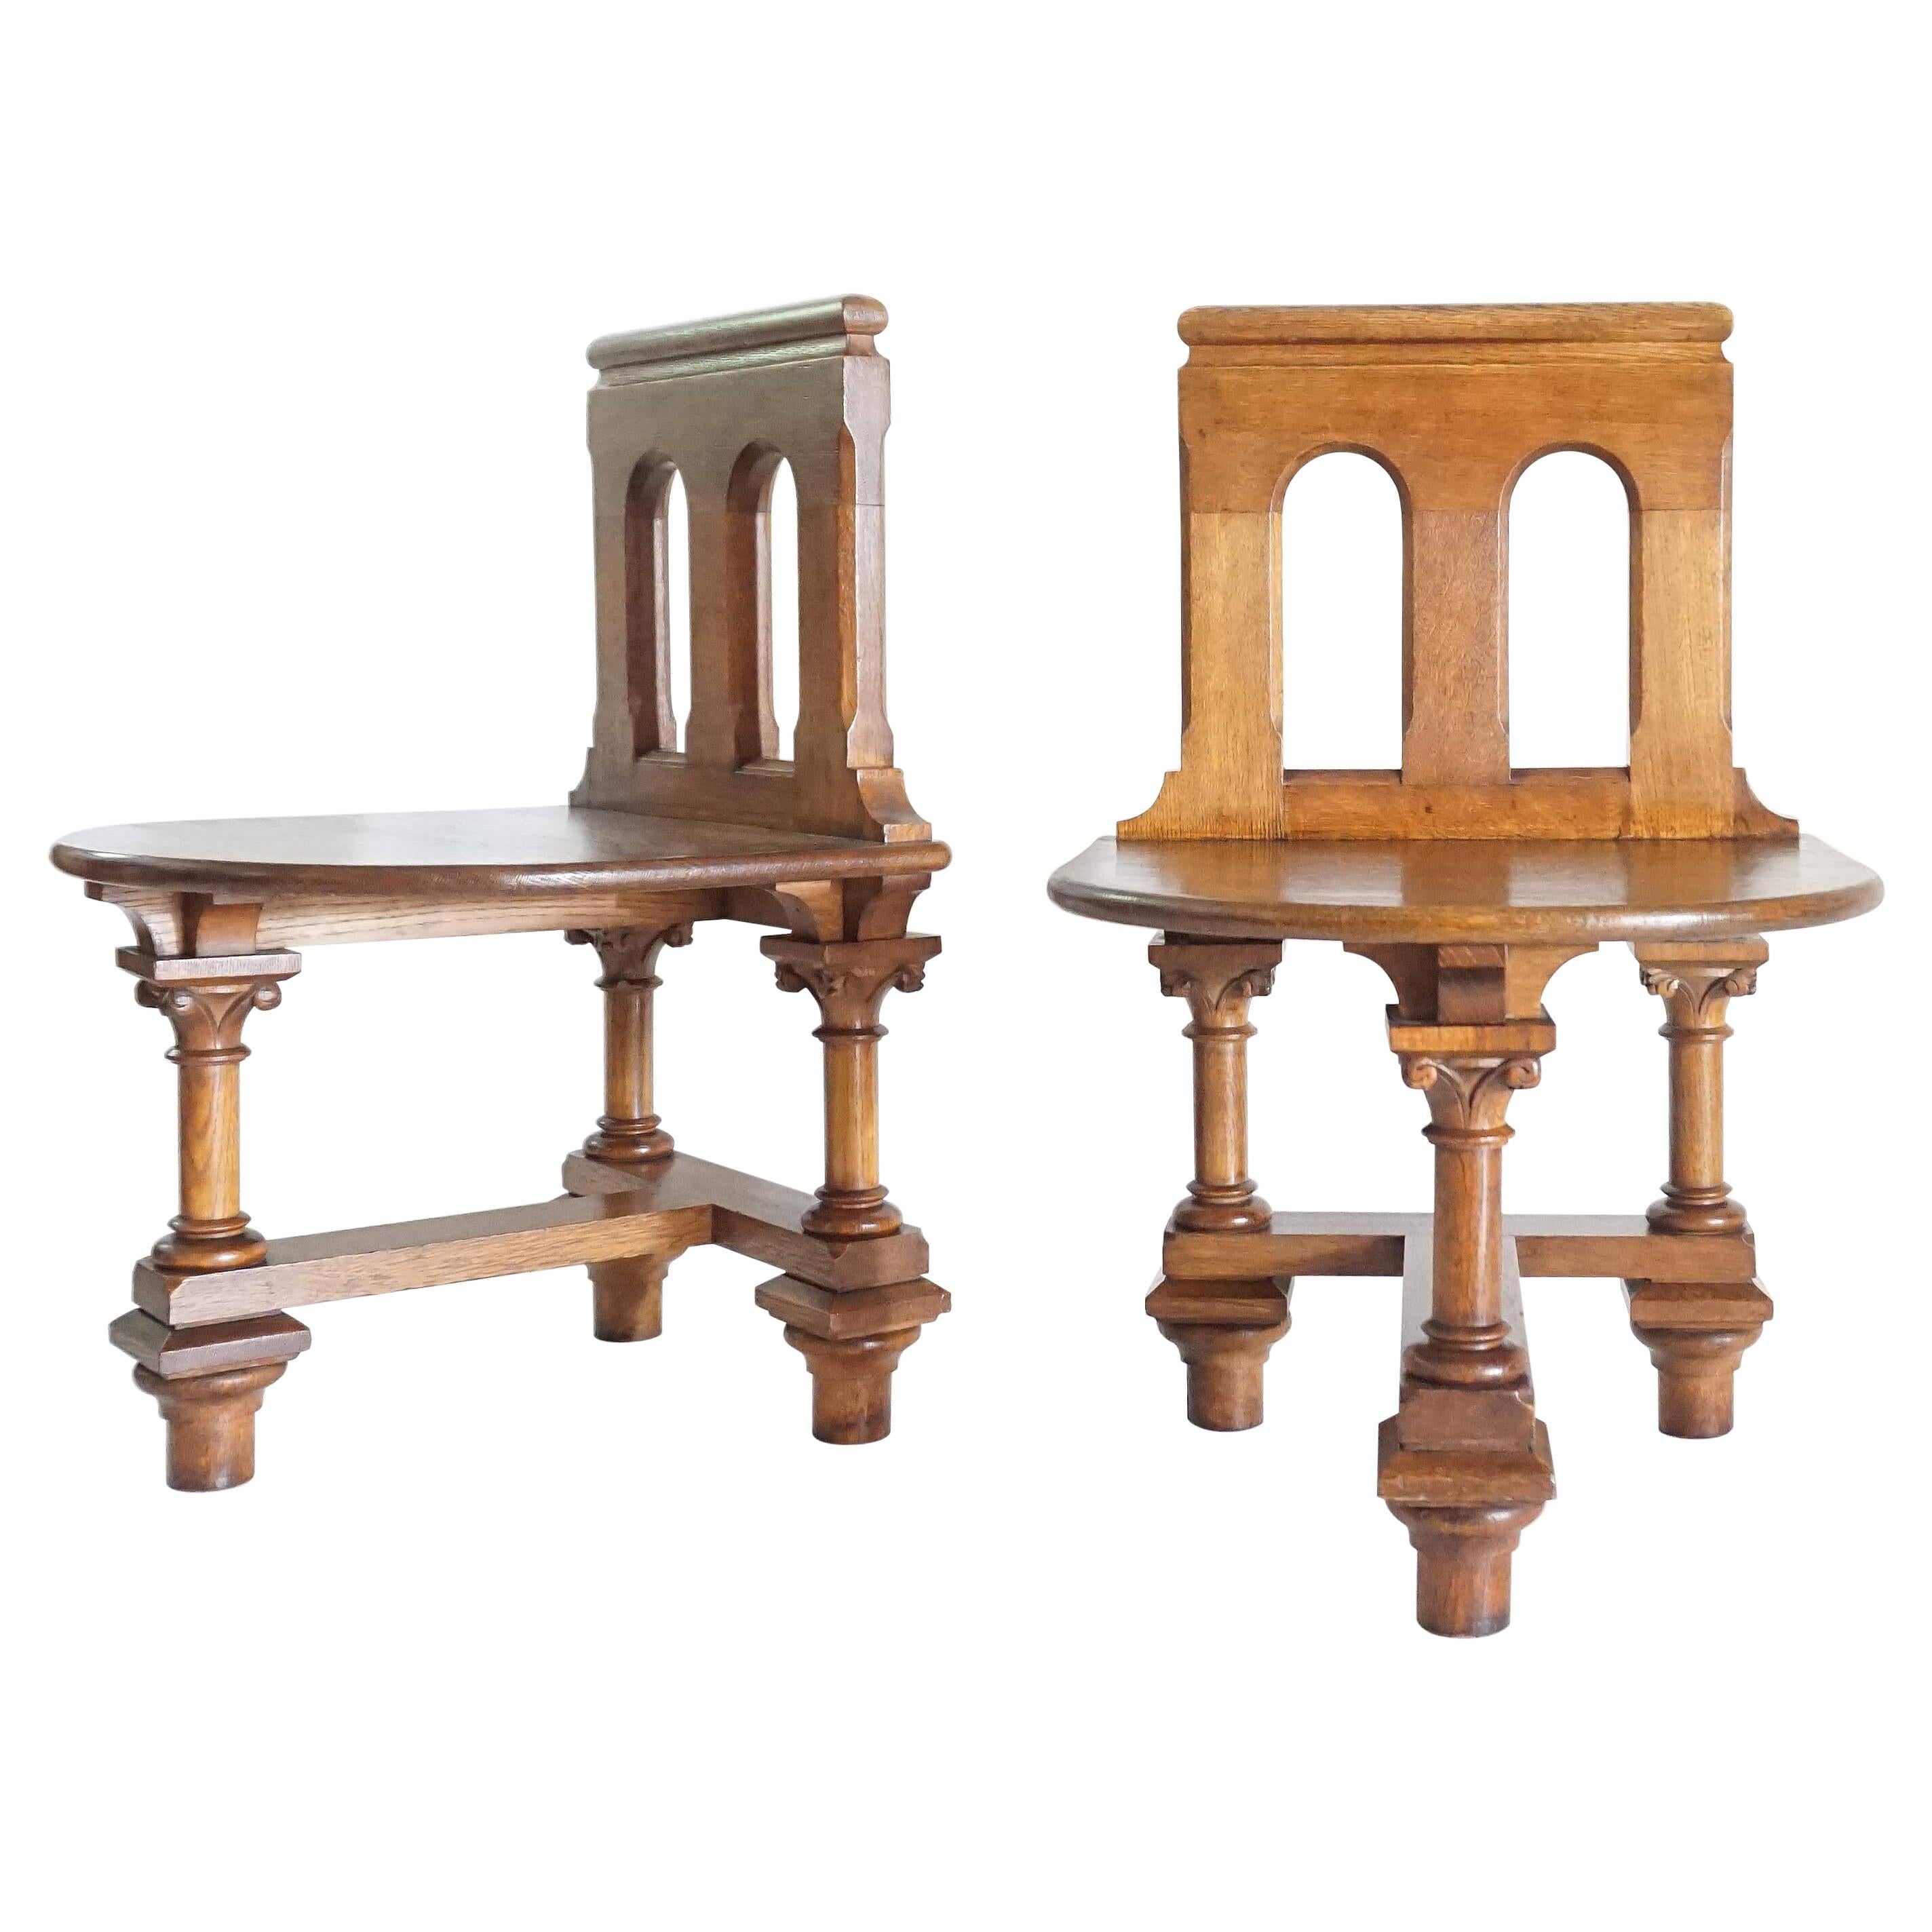 French Romanesque Revival Oak Hall Seats or Chairs, circa 1900